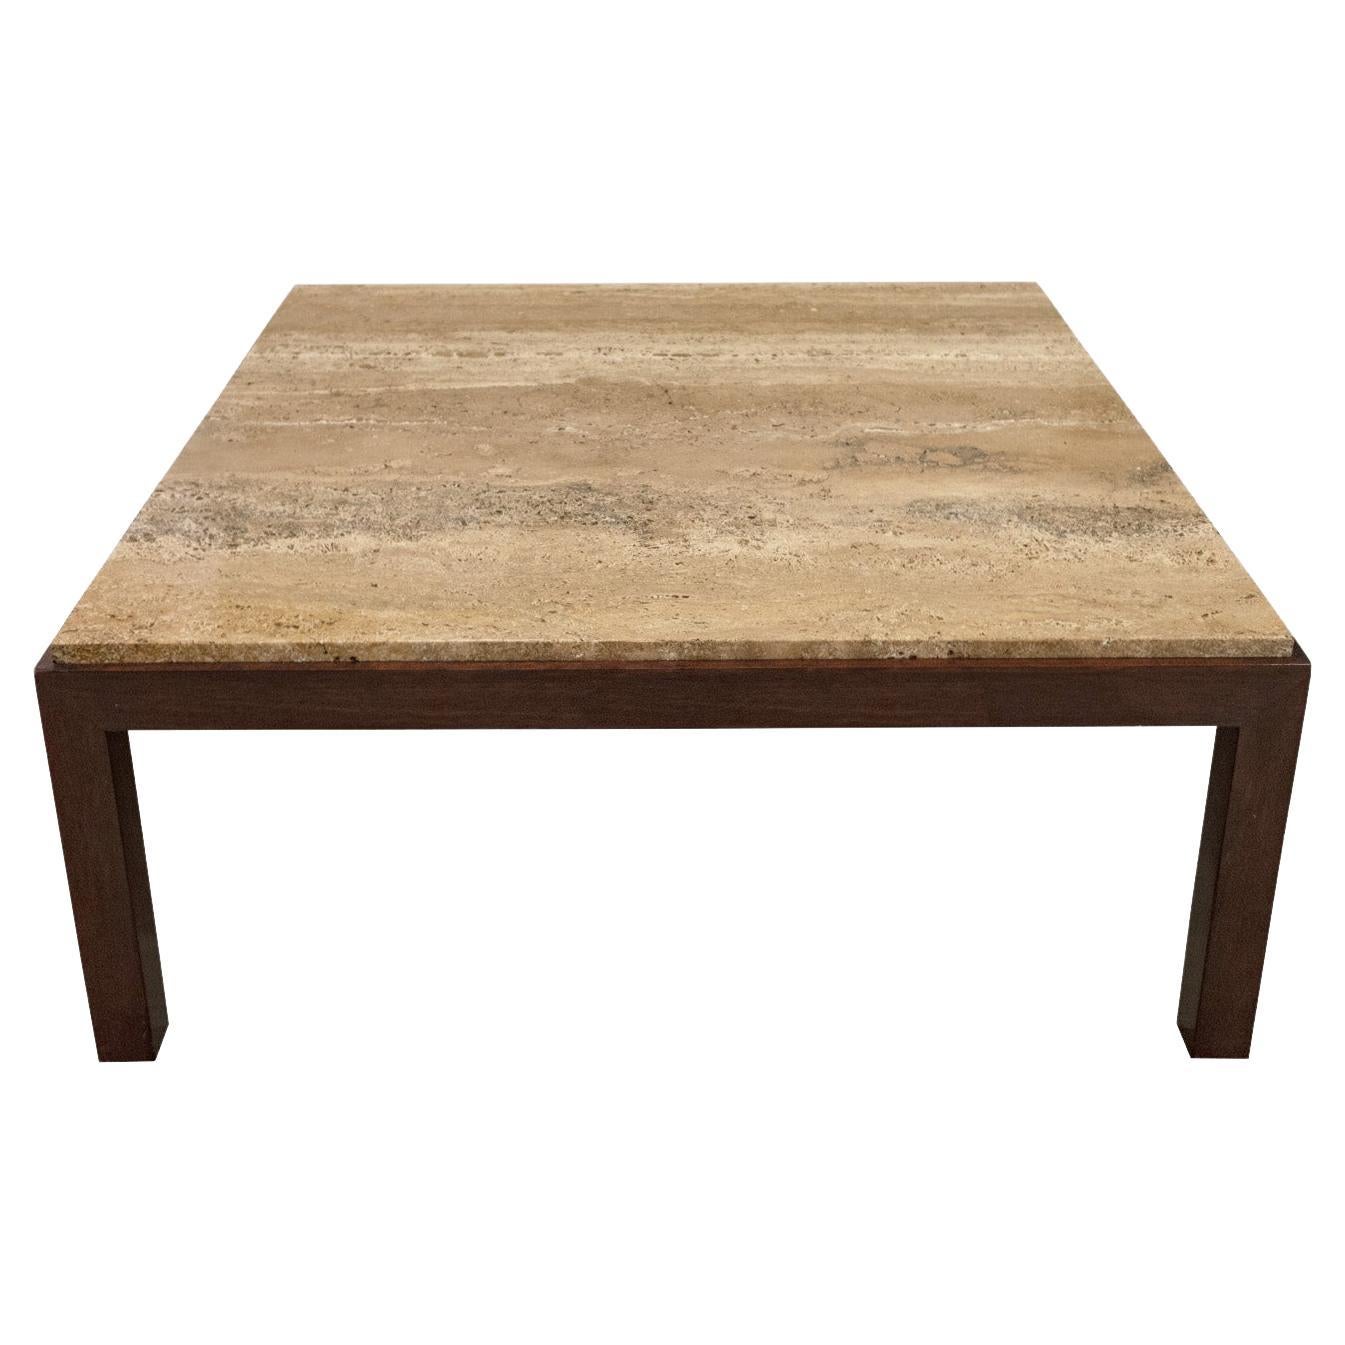 Edward Wormley Coffee Table with Italian Travertine Top 1952 'Signed'